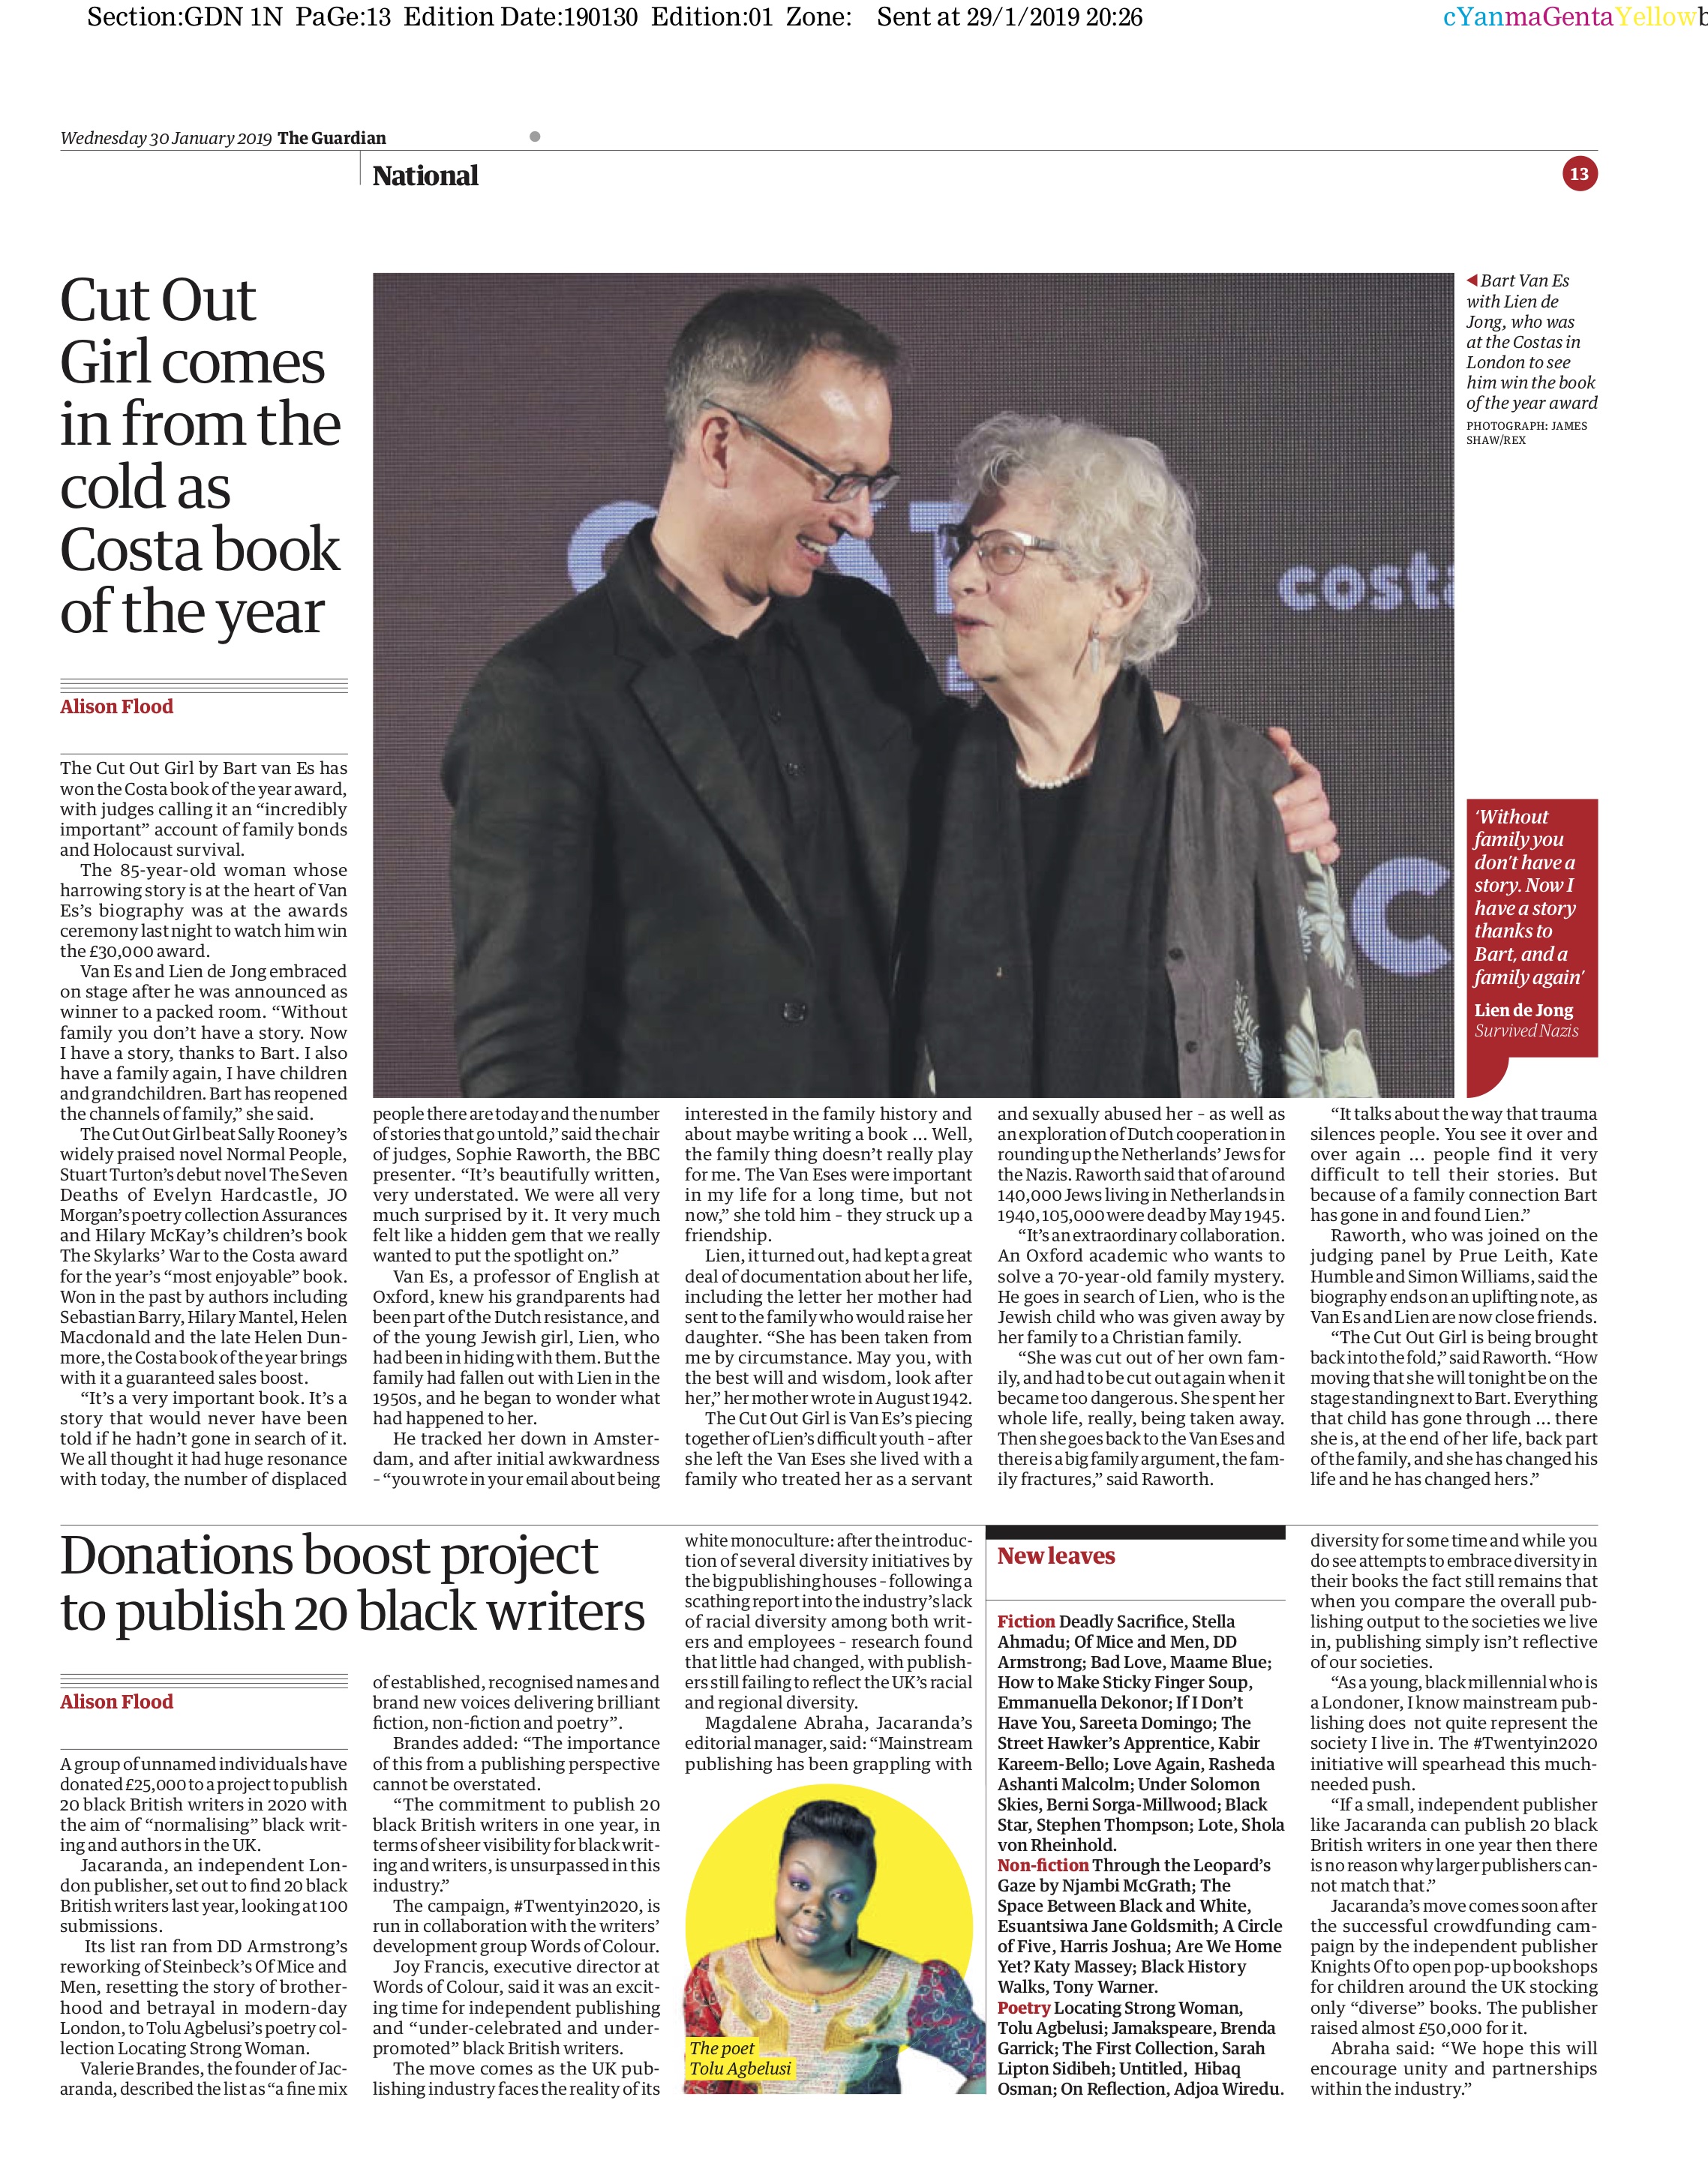 Costa Book of The Year Awards / Guardian